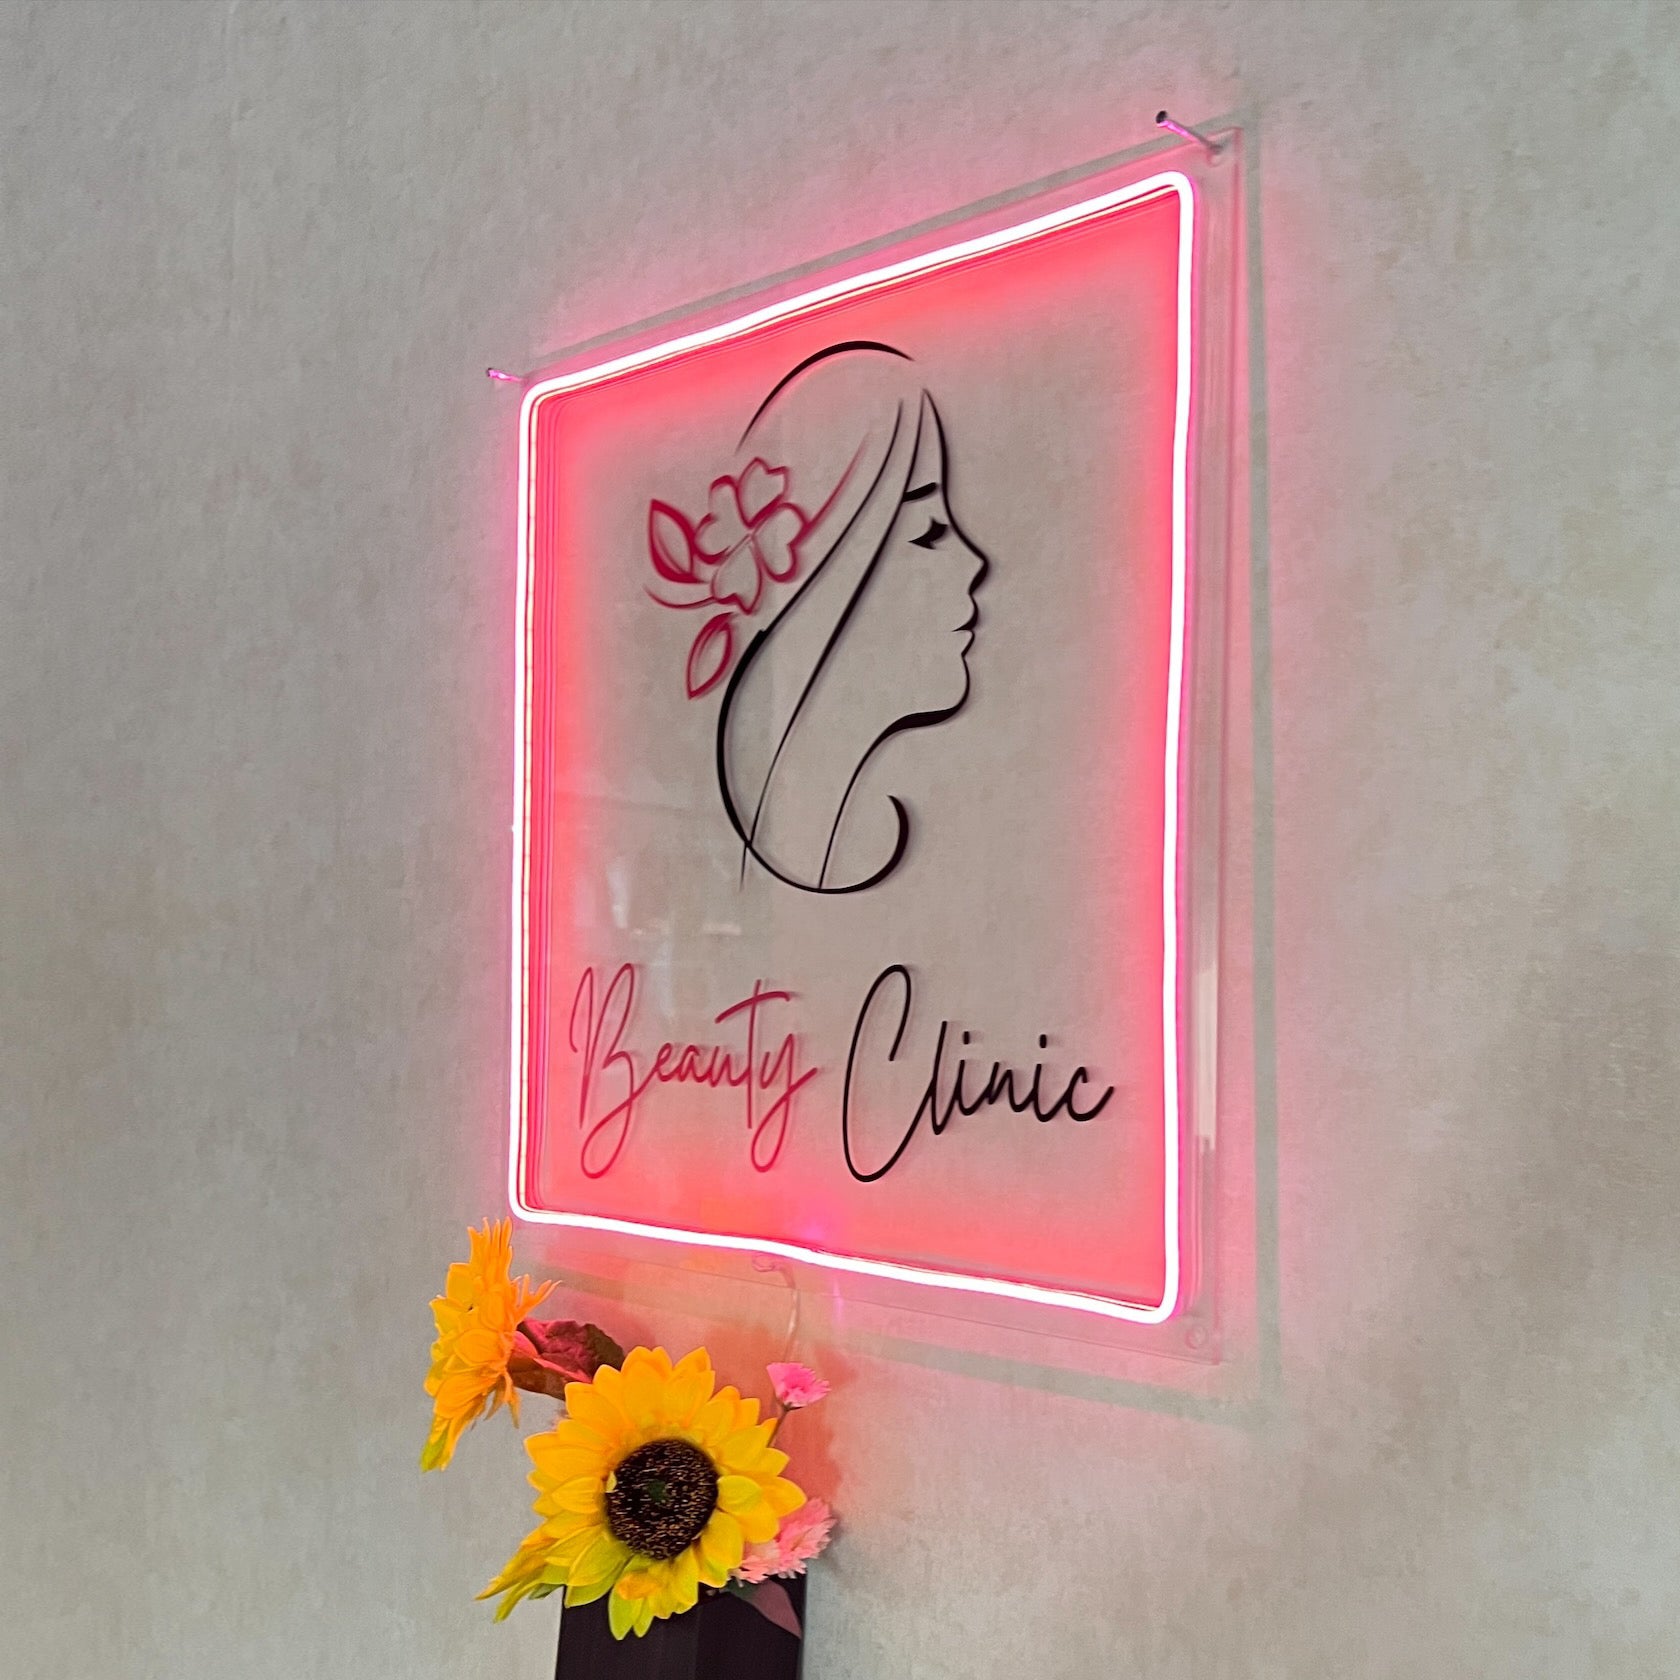 Custom neon Sign made by oNeonCrafts